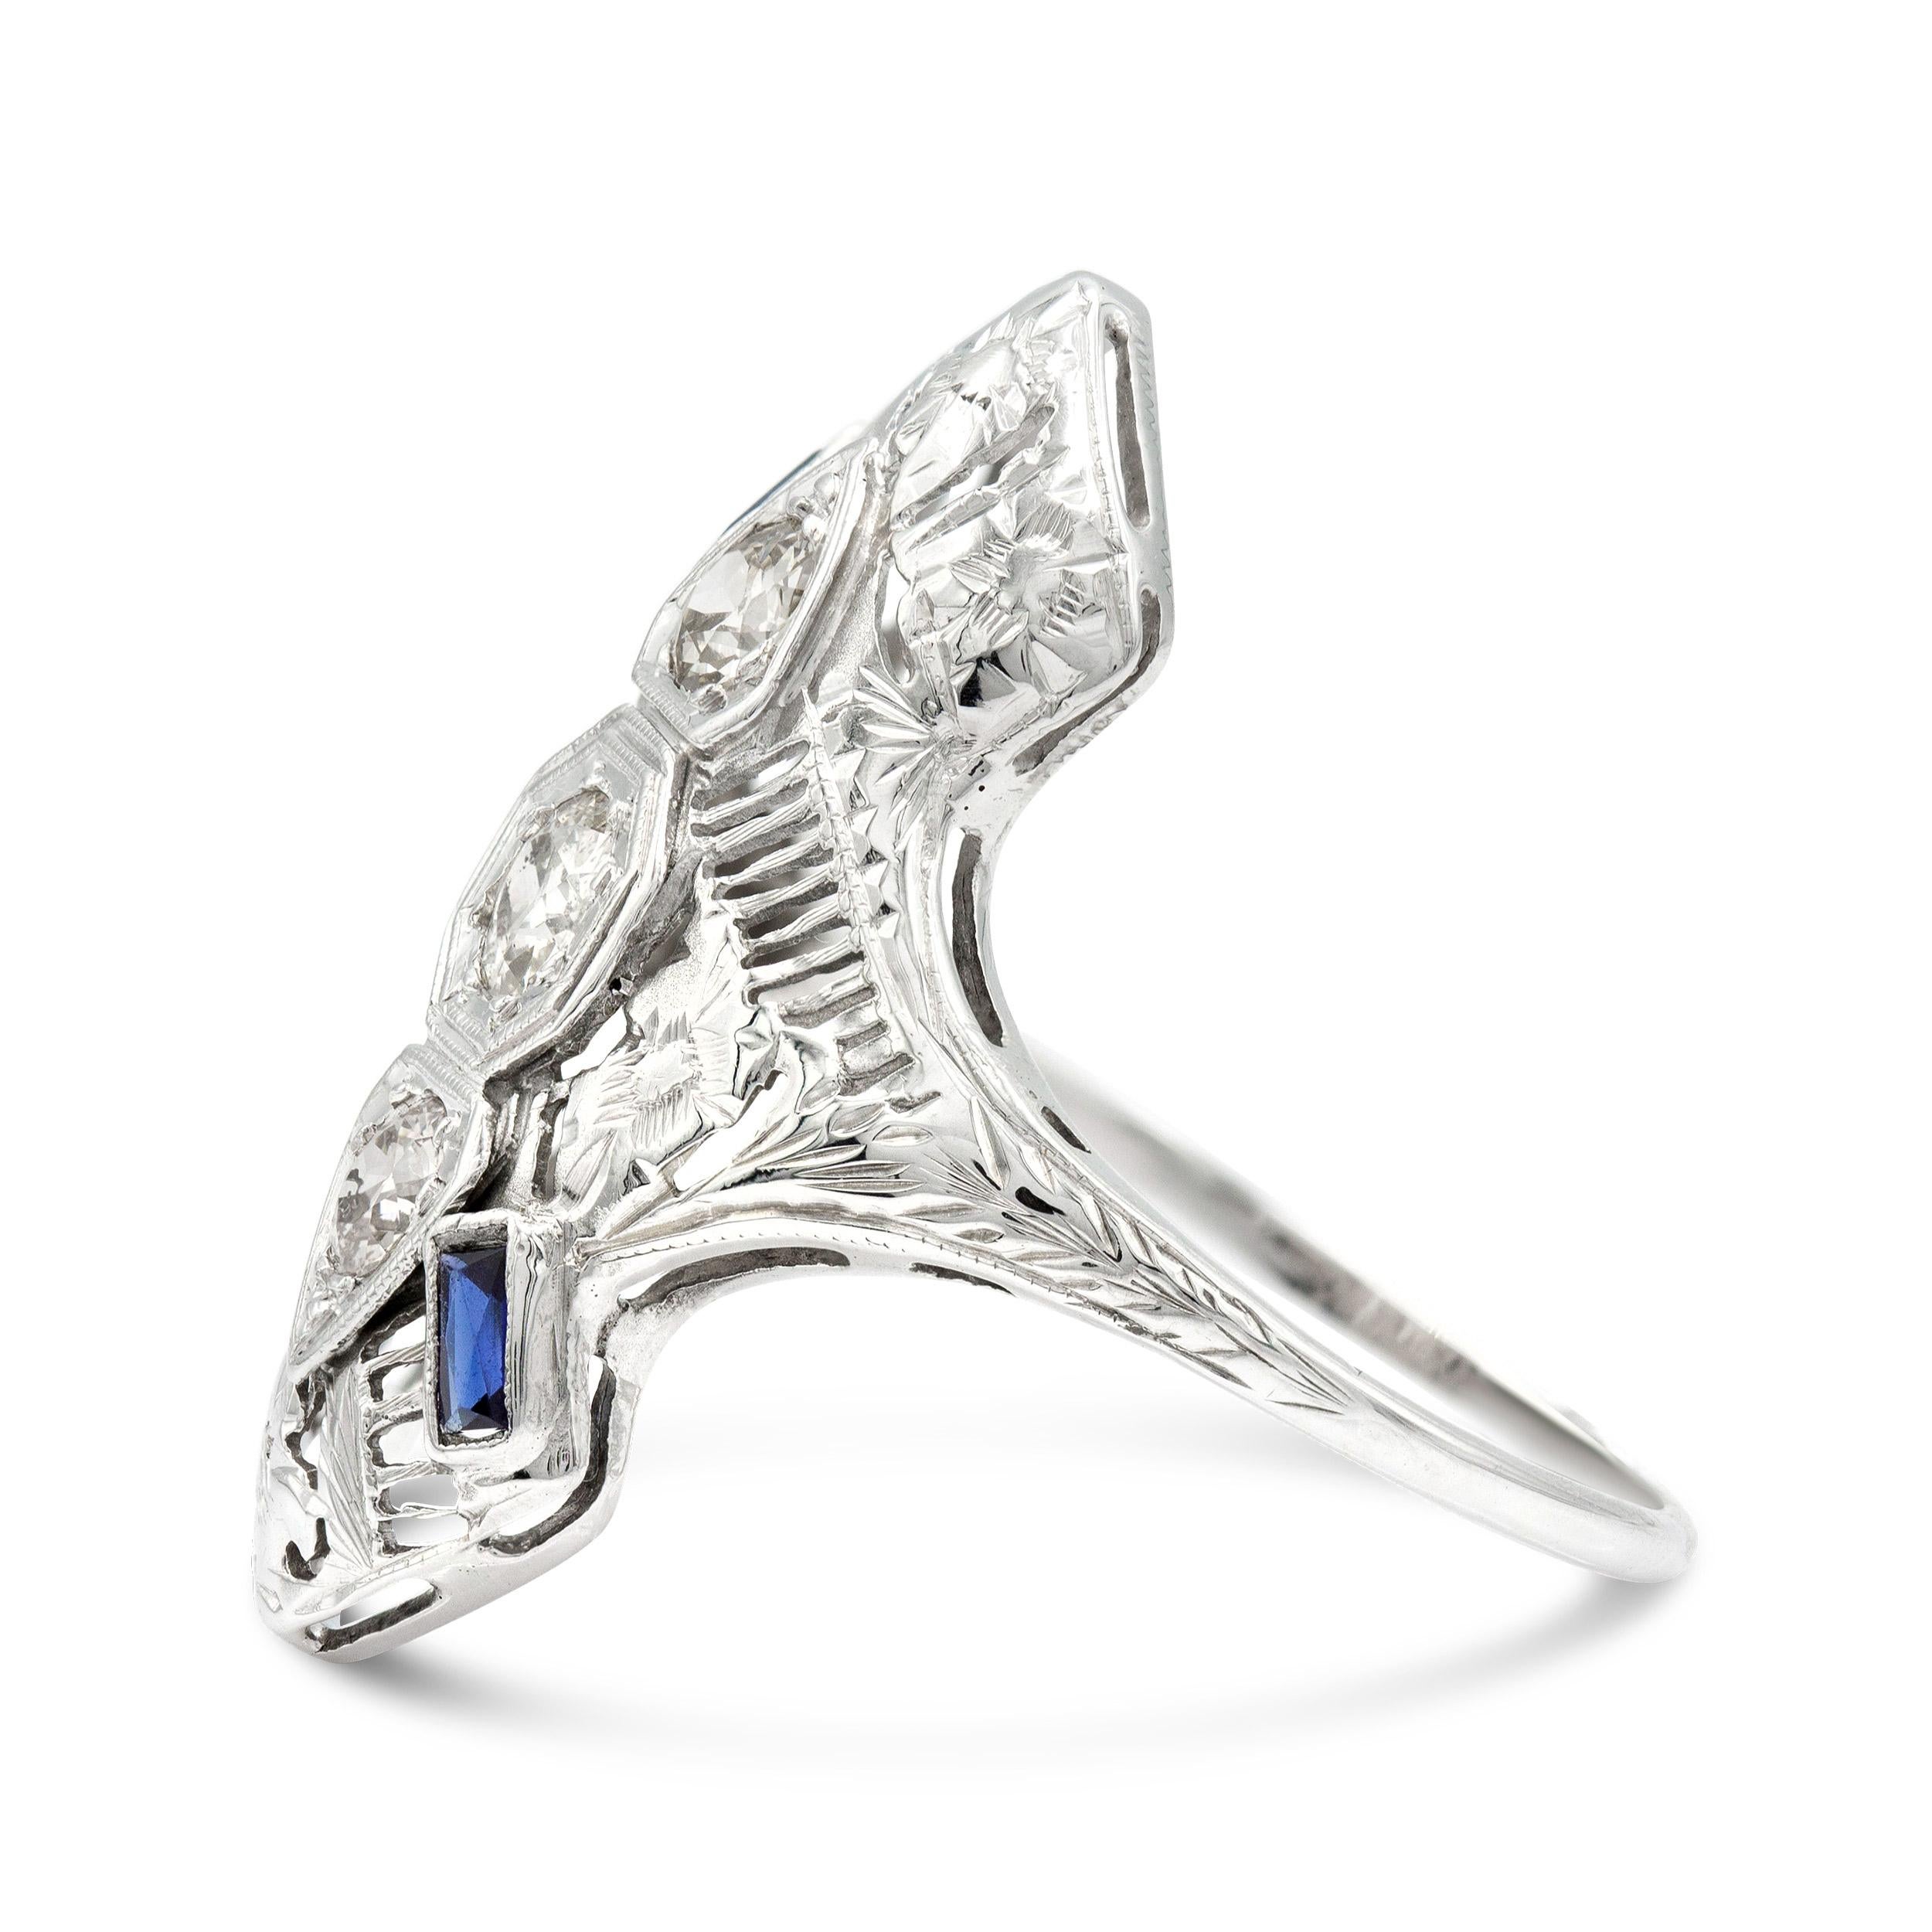 Old European Cut Art Deco 0.52 Ct. Three Stone Diamond and Sapphire Ring in 14k White Gold For Sale